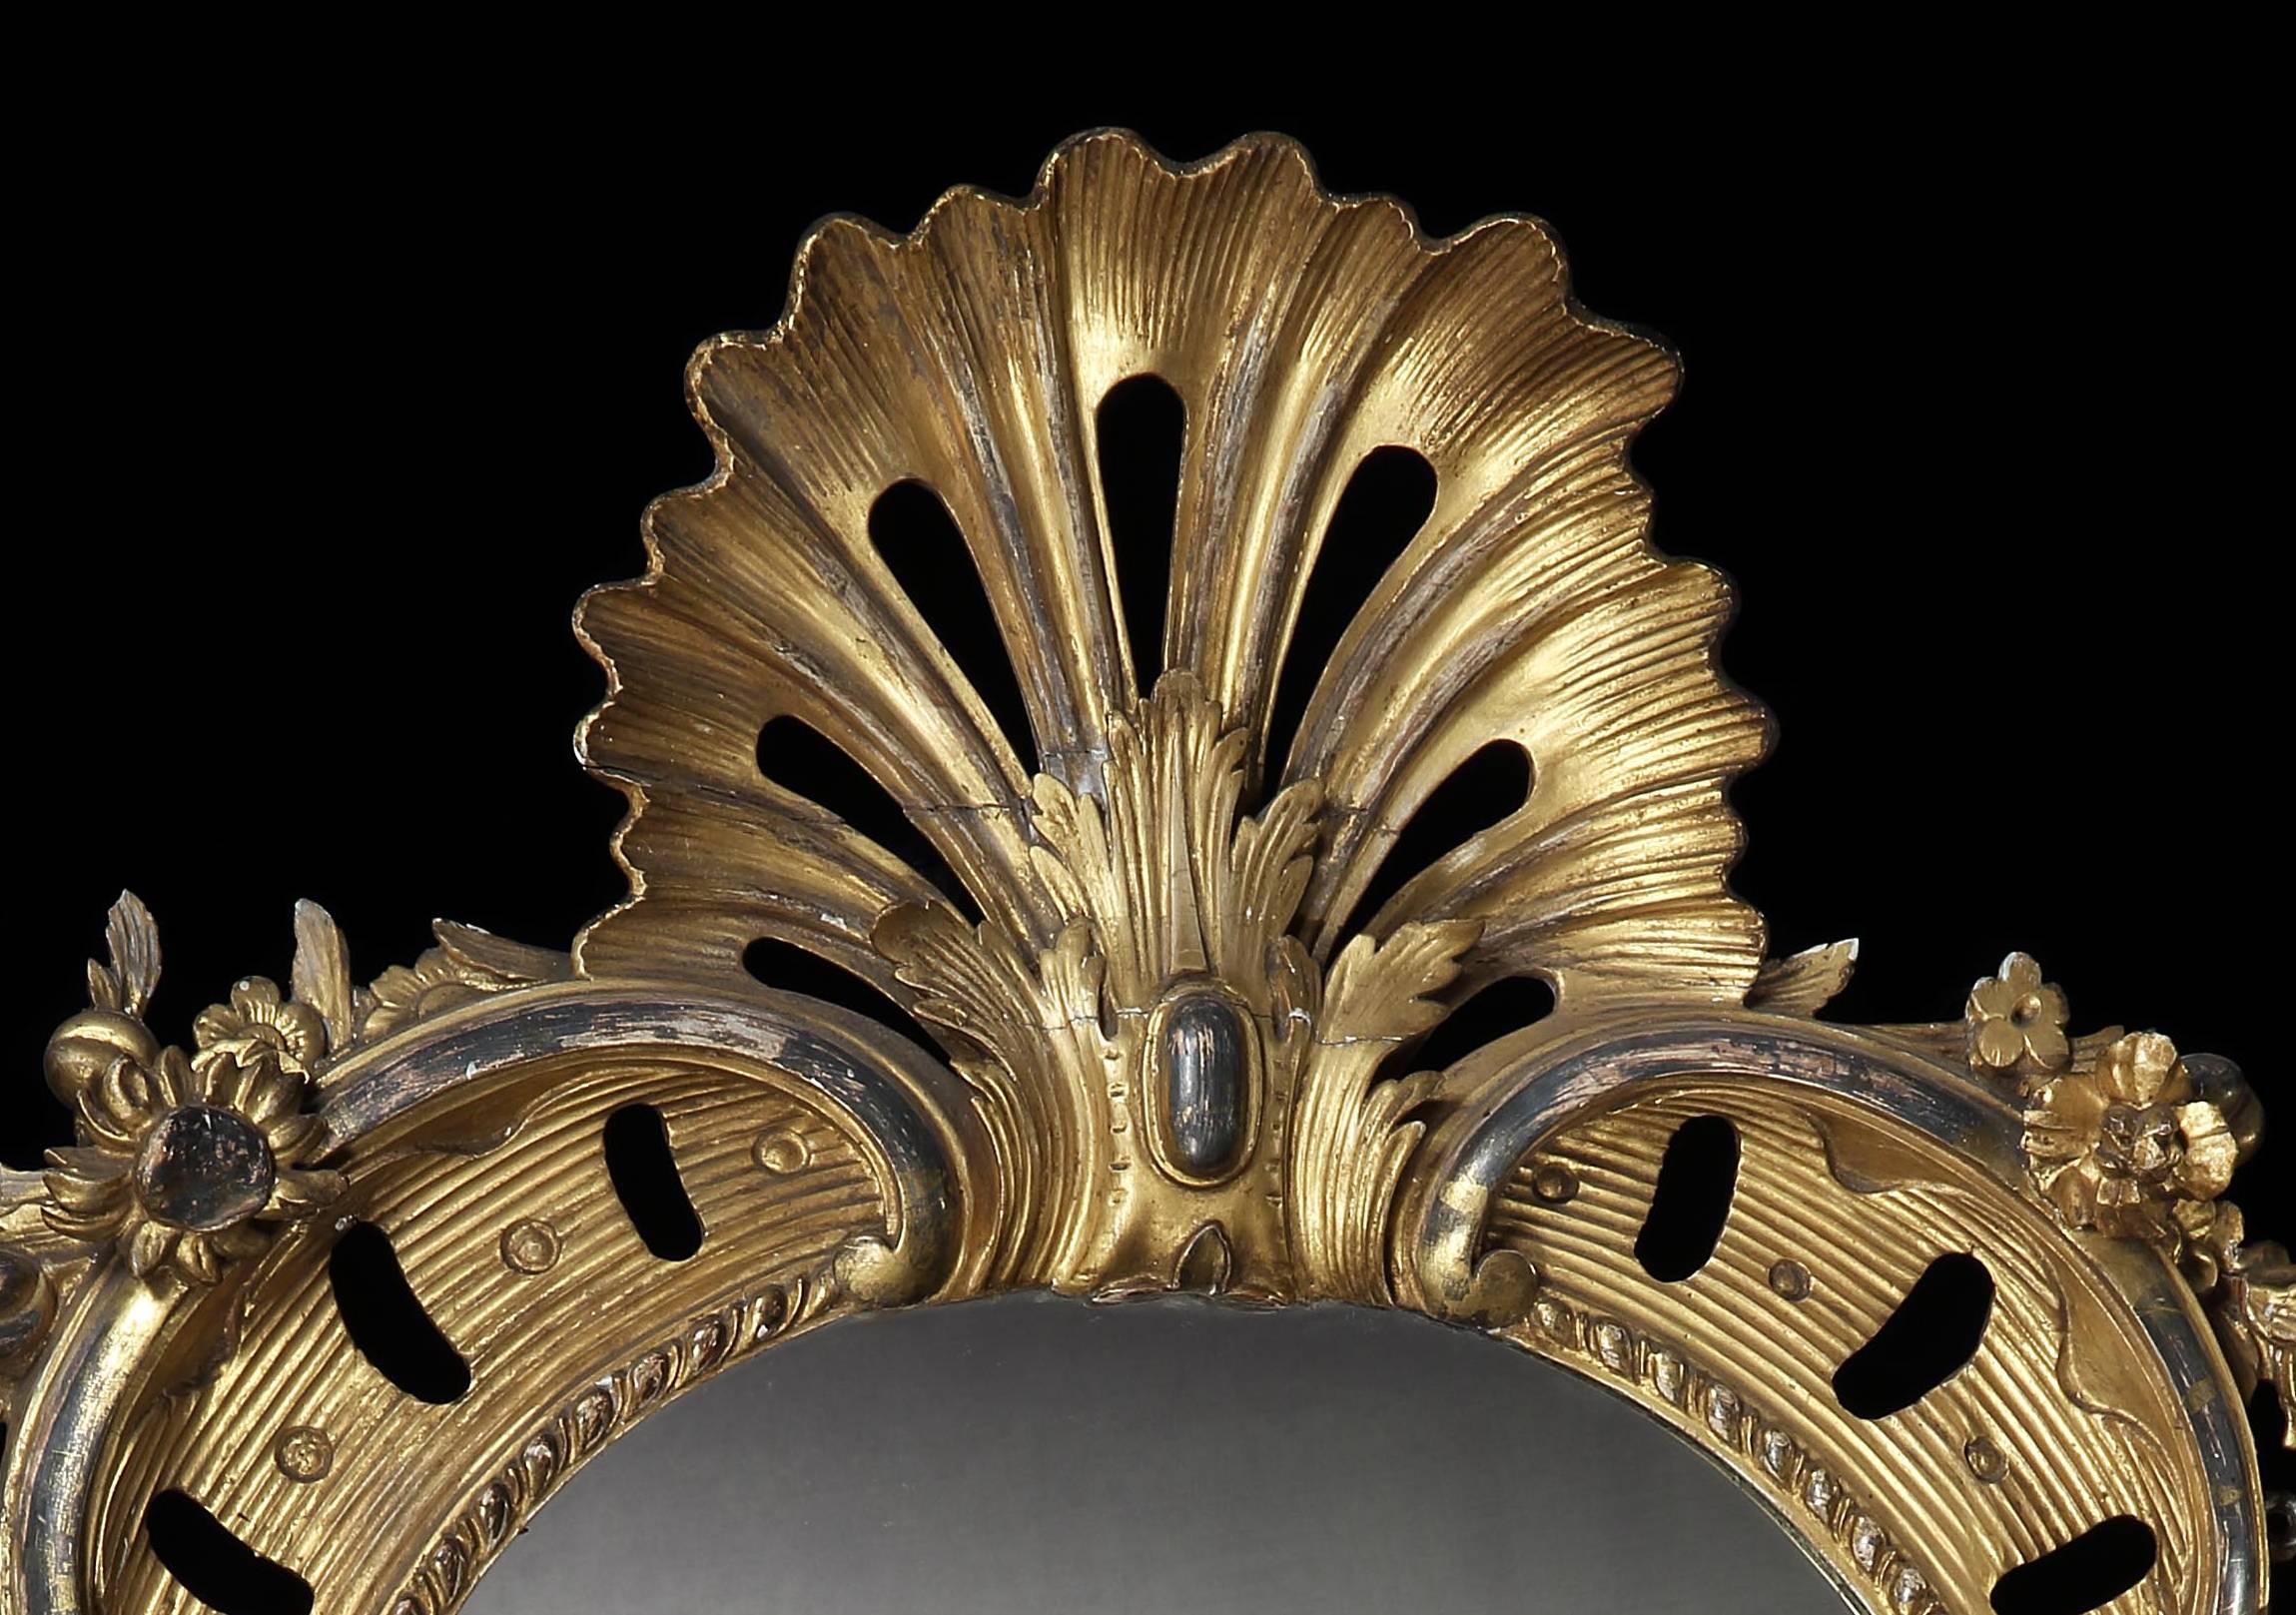 A fine mid-19th century oval giltwood mirror of large-scale with foliate designs to the outer frame, the gilding in two tones, with a pierced scallop shell cresting, with a mercury mirror plate.